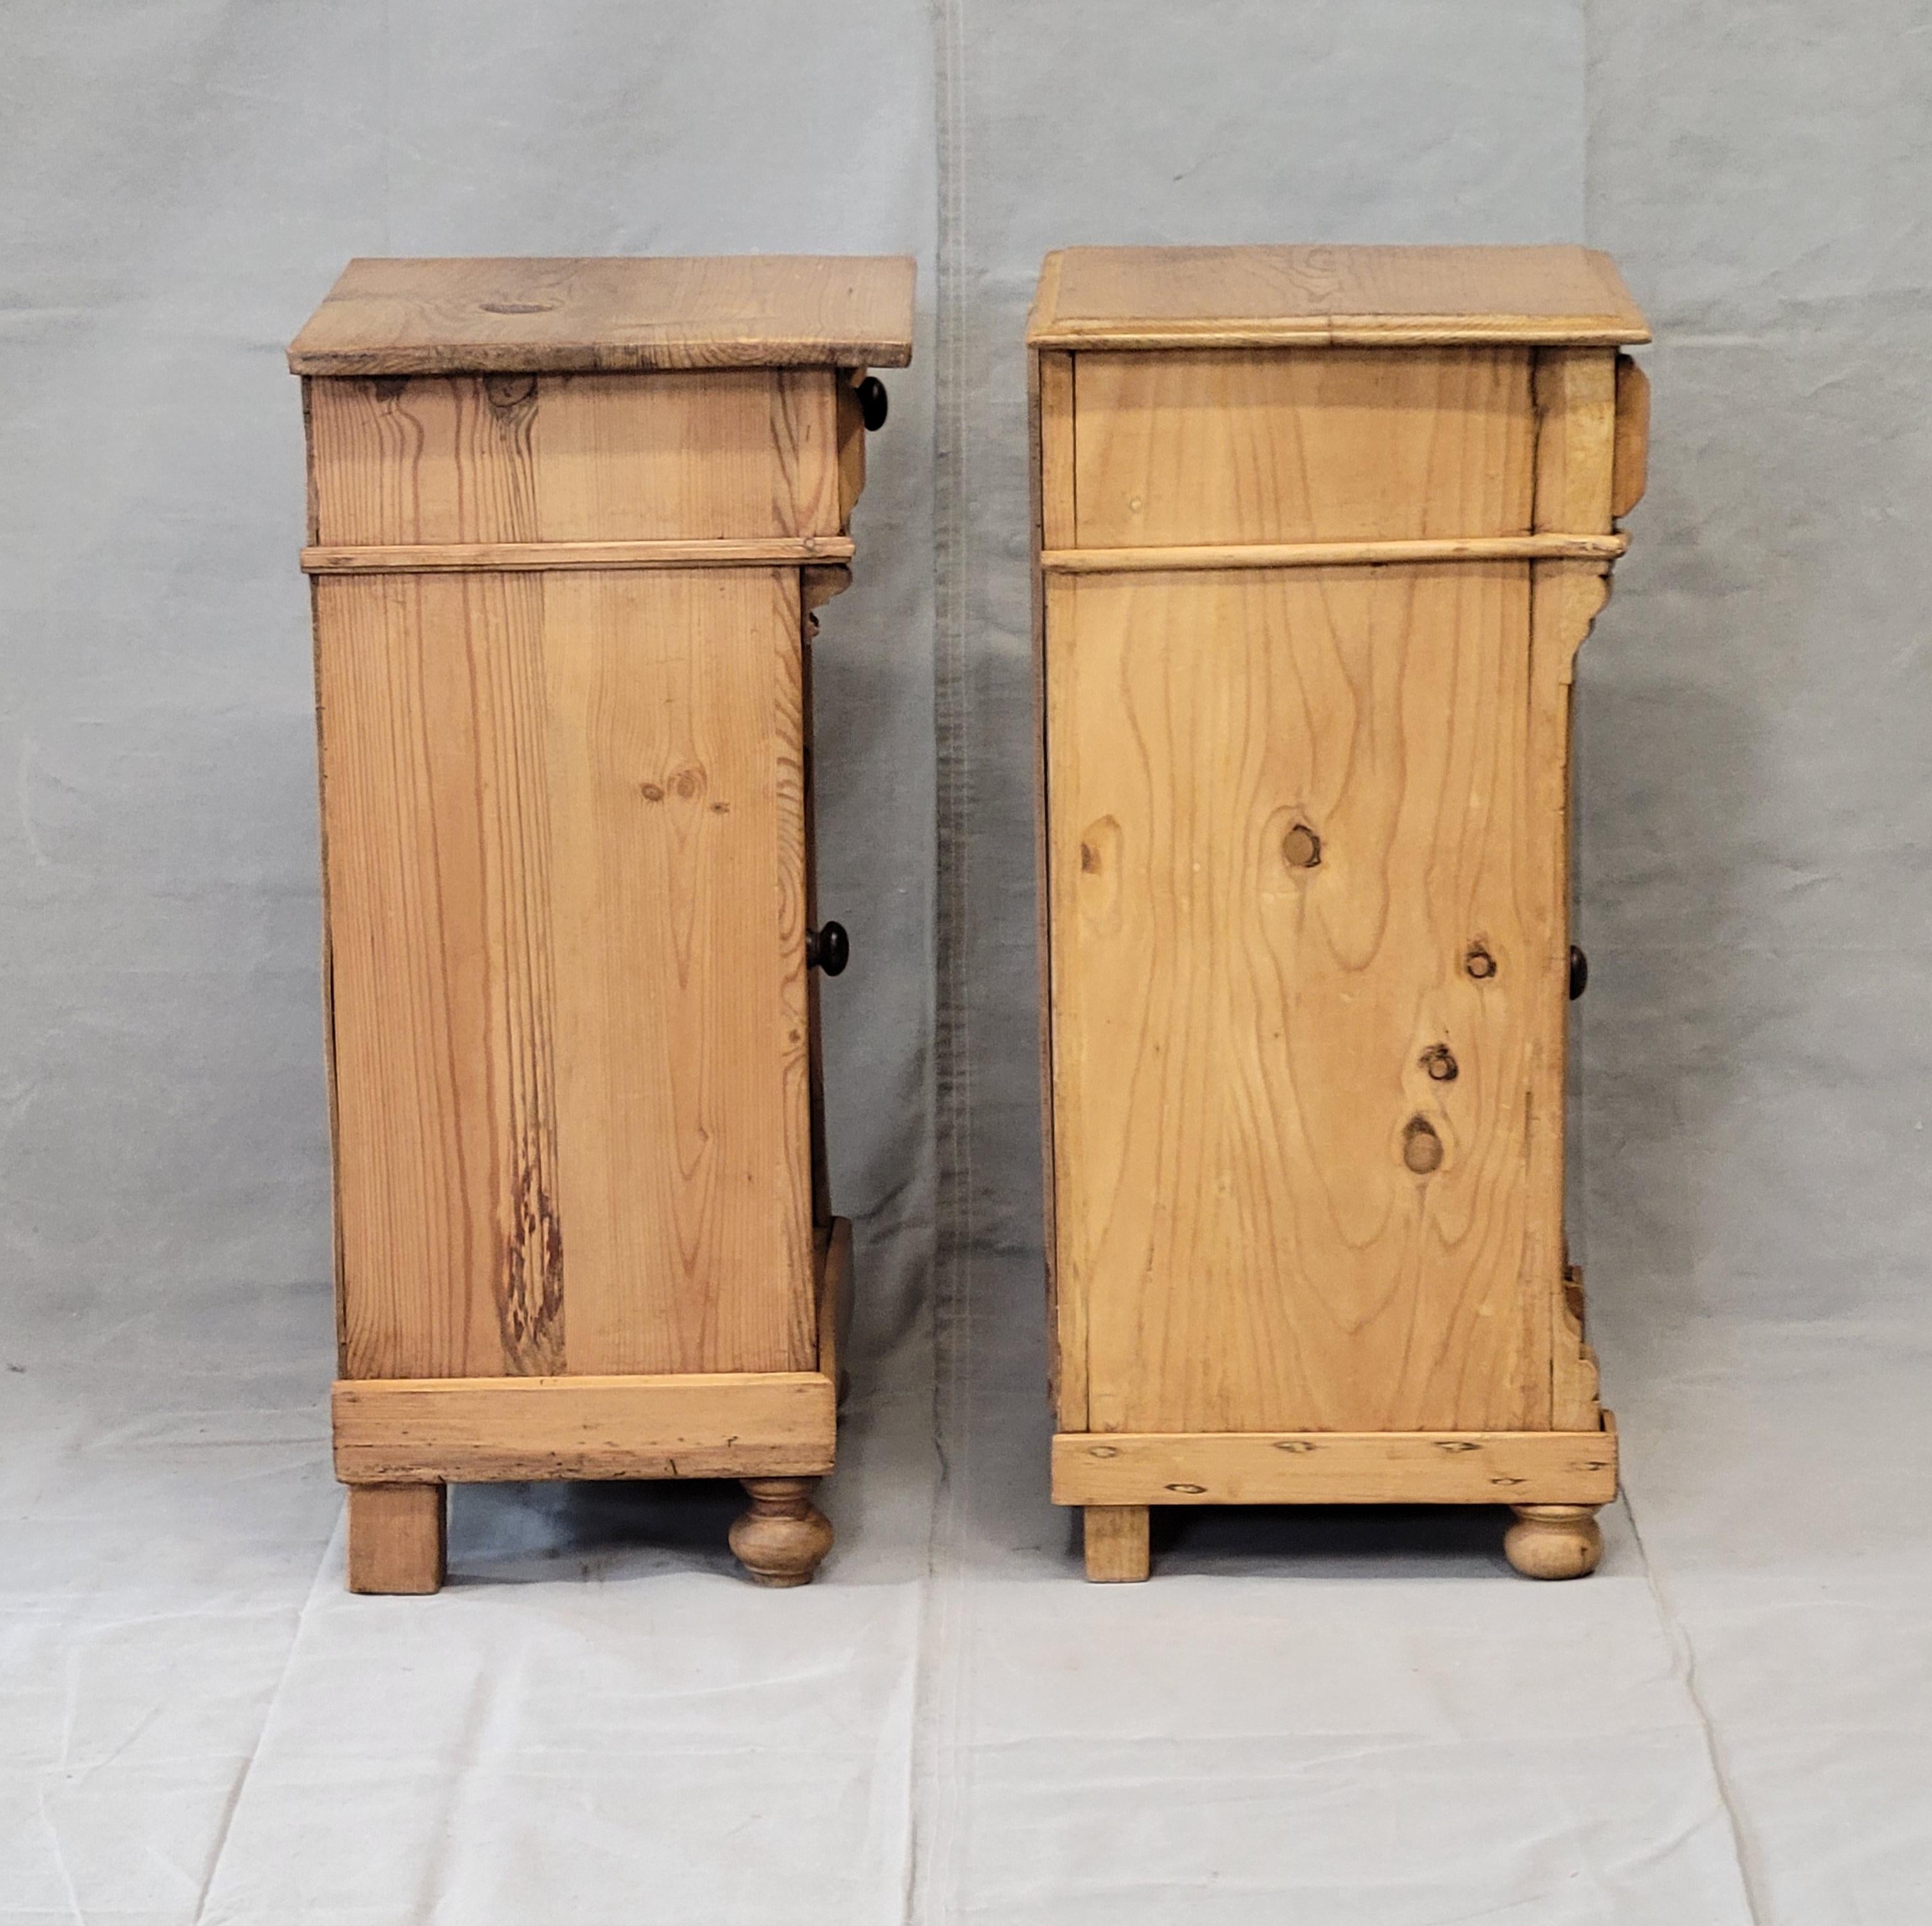 Antique Eastern European Pine Nightstands - a Near Pair For Sale 3